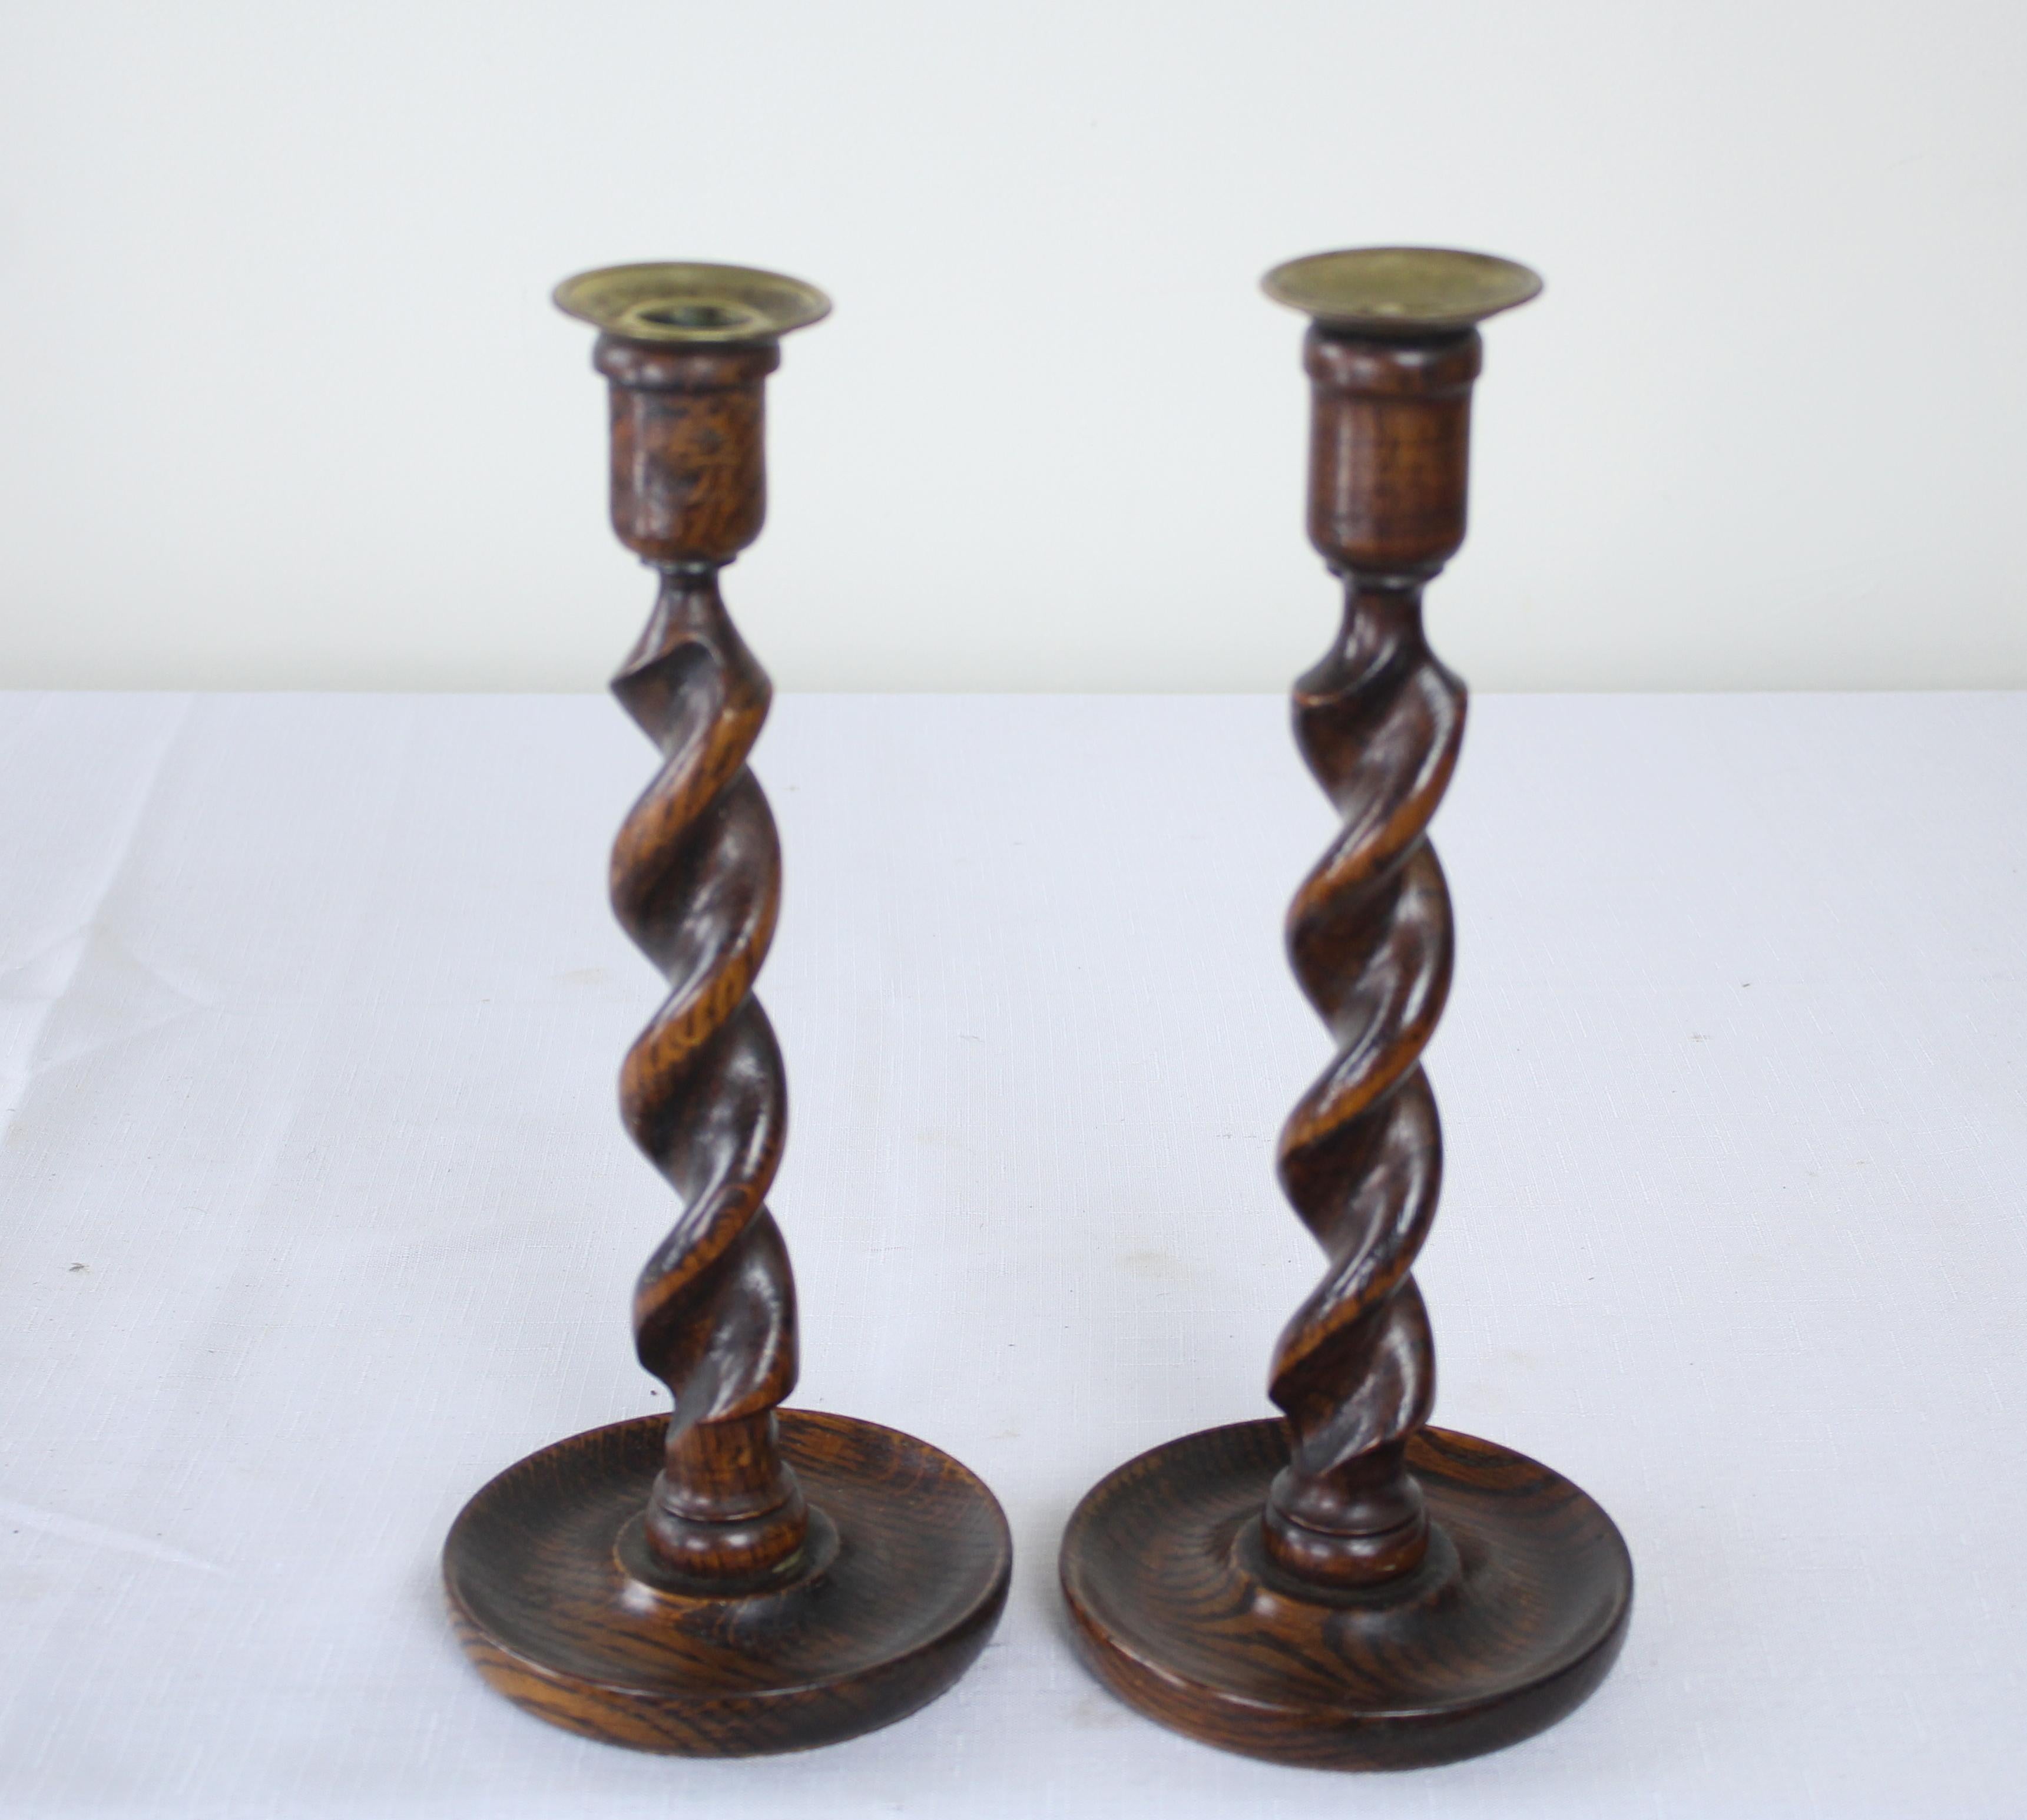 Two pairs of oak candlesticks, England, circa 1900. Heights vary from 11.25-12